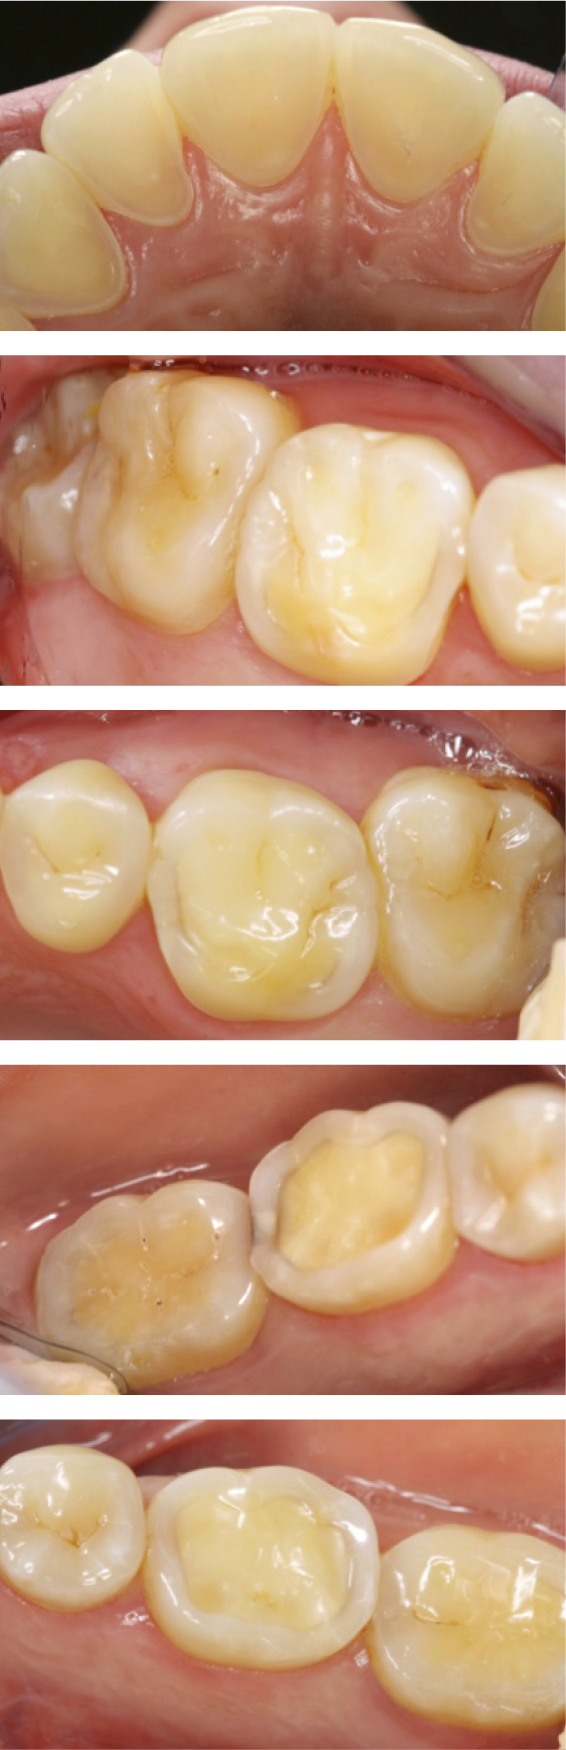 Opinions and Treatment decisions 
for Dental Erosion